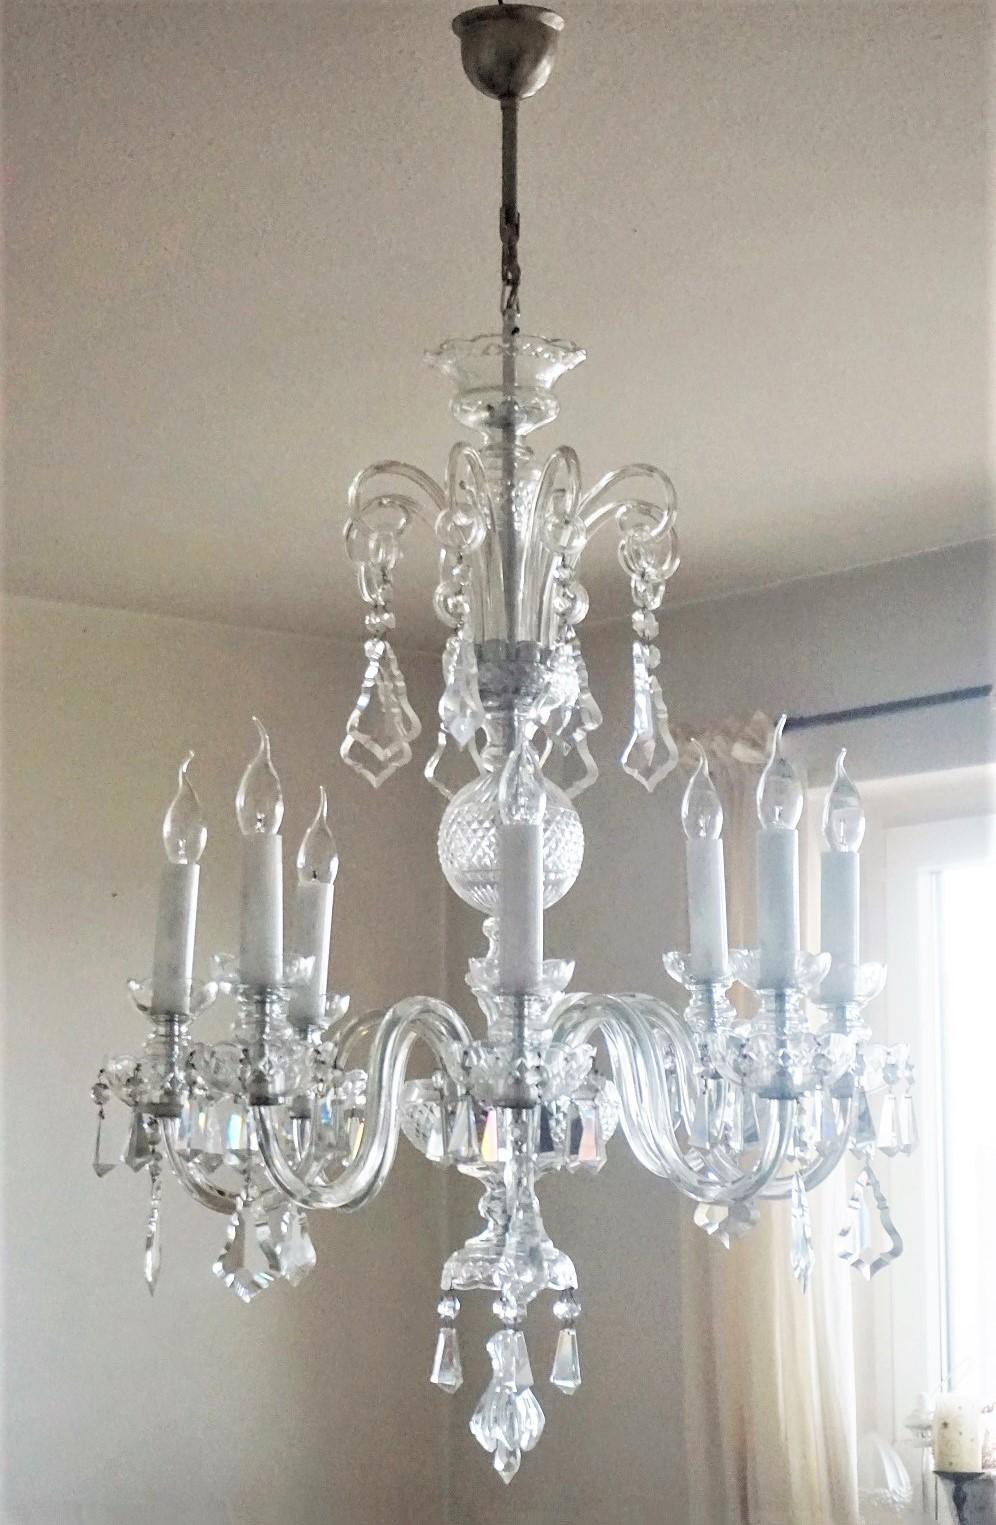 20th Century Large Original Venetian Handcrafted Murano Crystal Chandelier, Italy, 1910-1920 For Sale